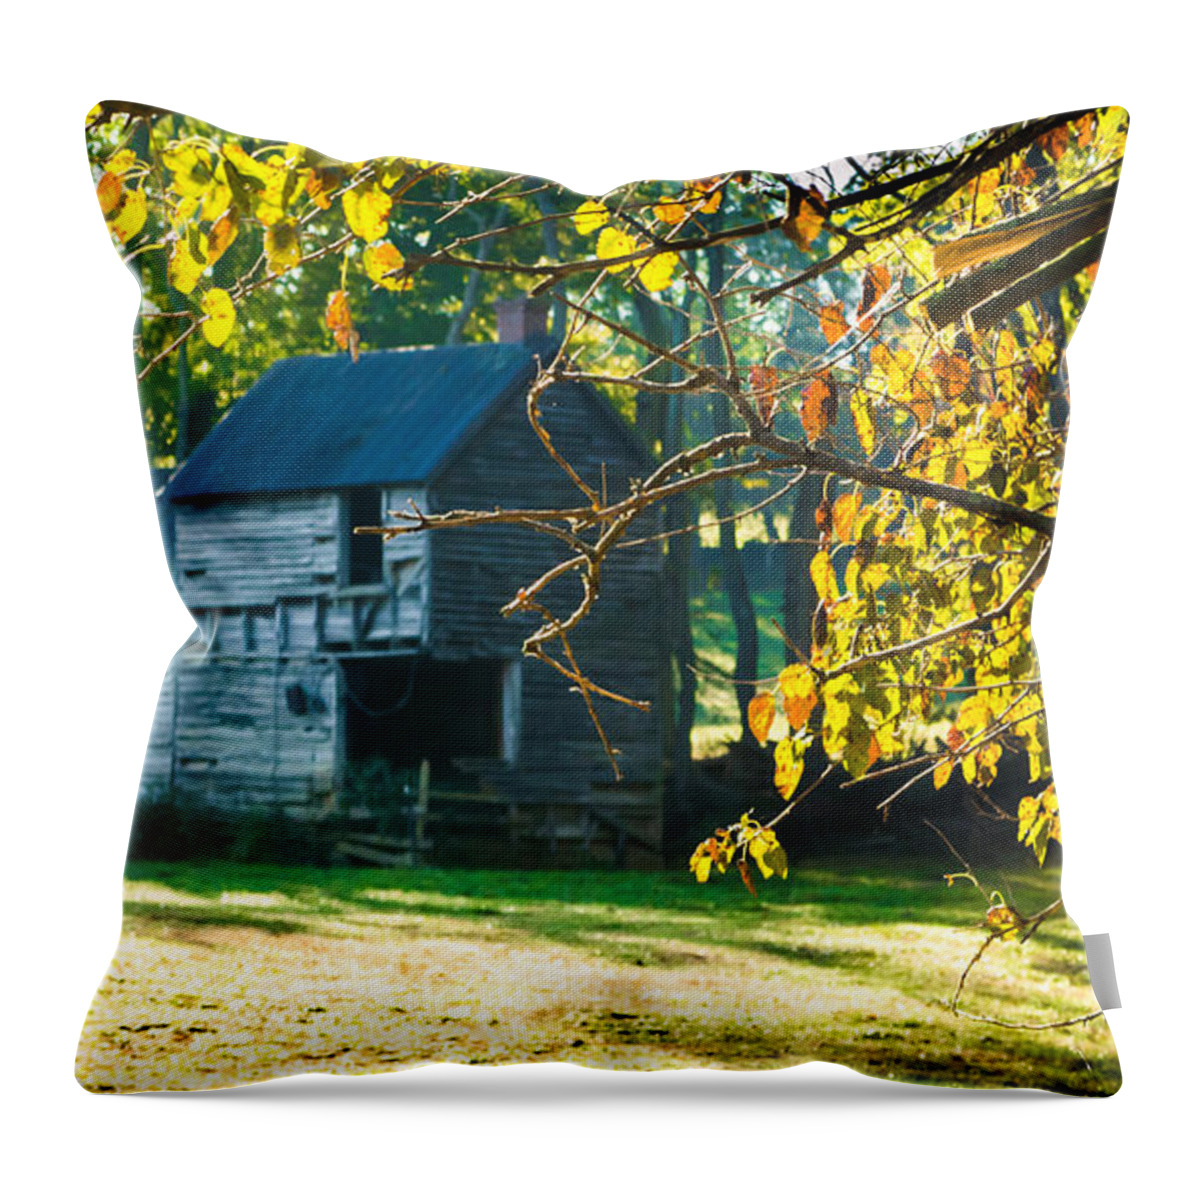 Blantyre Road Throw Pillow featuring the photograph Blantyre Road Drive 4 by Carlee Ojeda